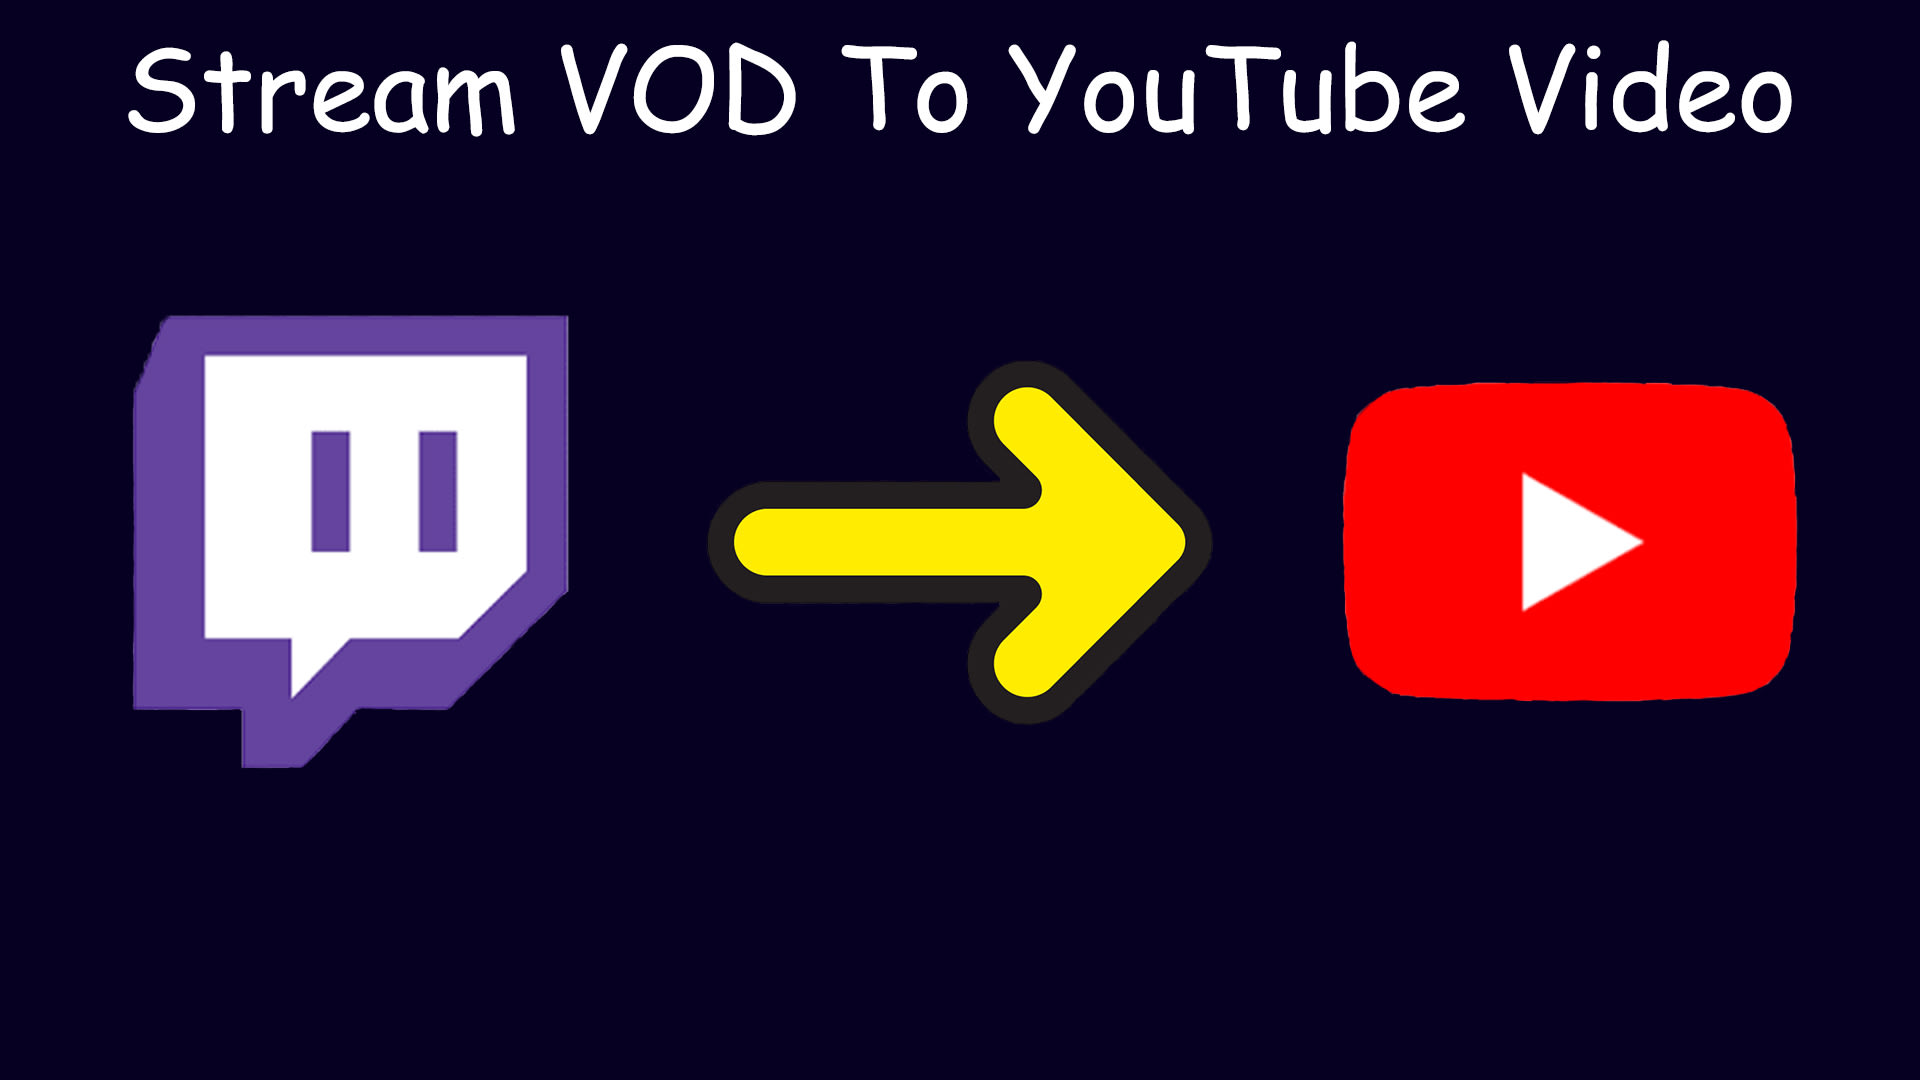 Turn your stream vod into a youtube video for you by Jensovic_21 Fiverr